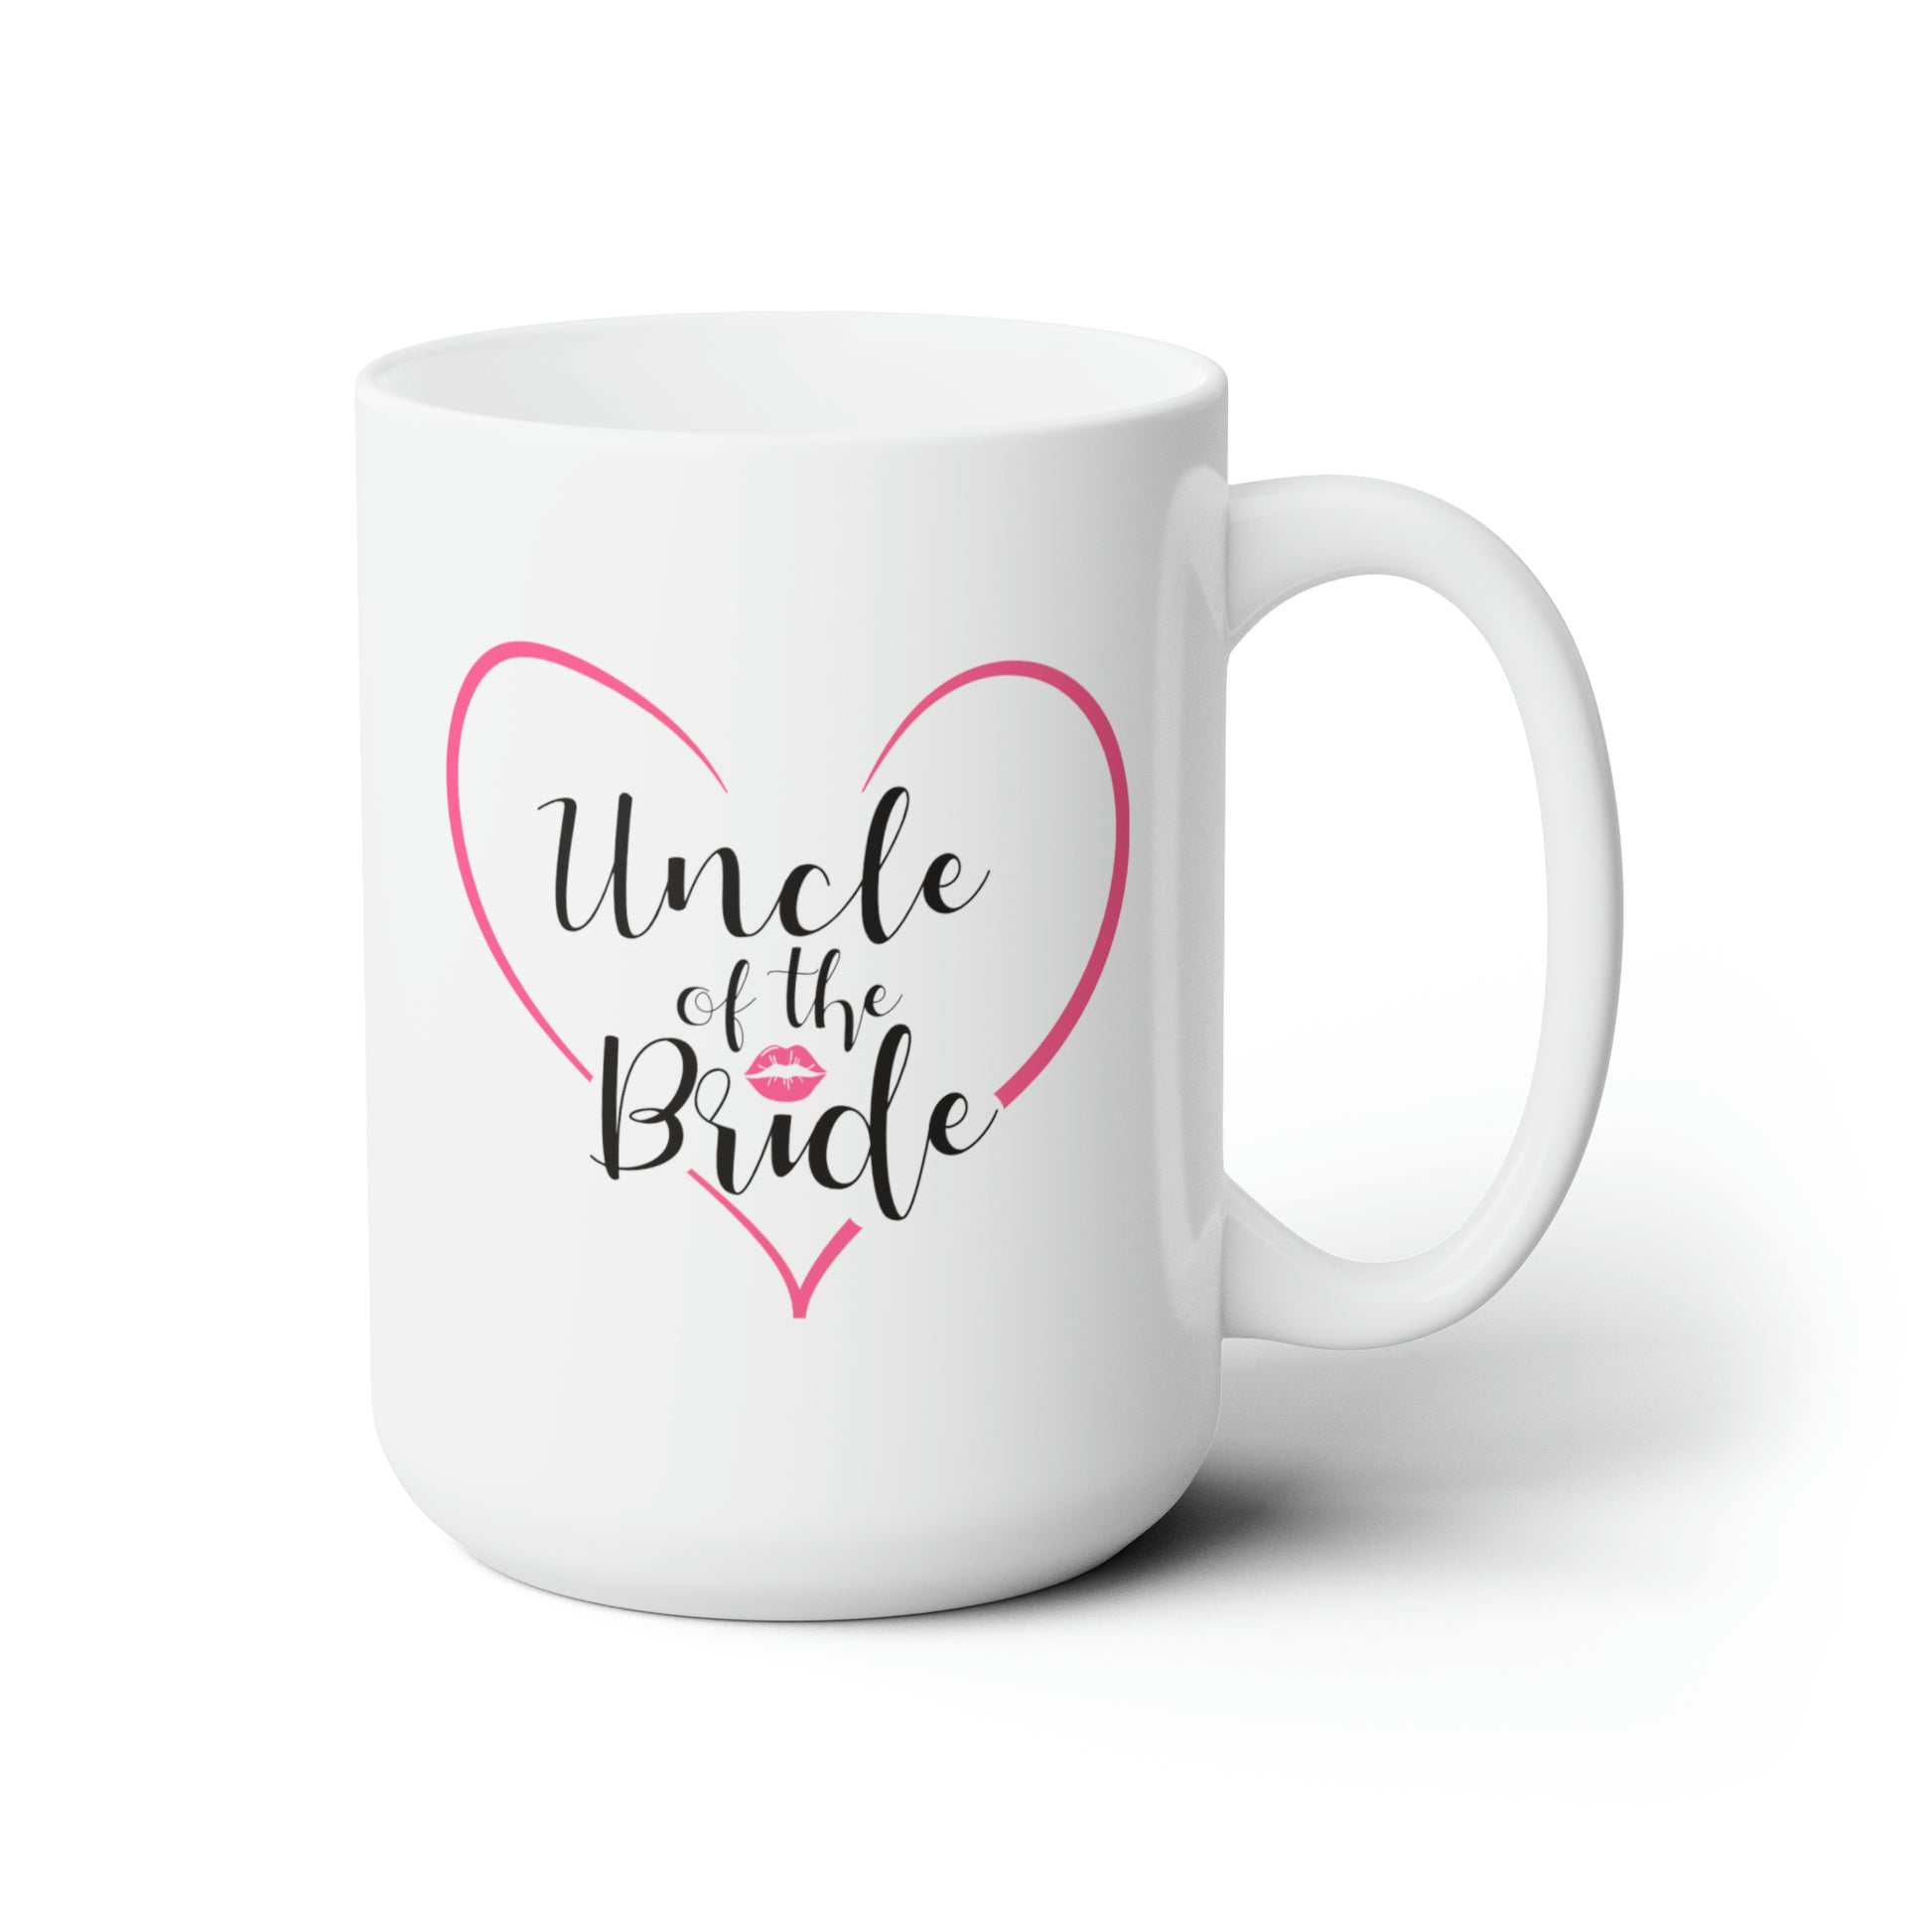 Uncle of the Bride Coffee Mug - Double Sided White Ceramic 15oz - by TheGlassyLass.com